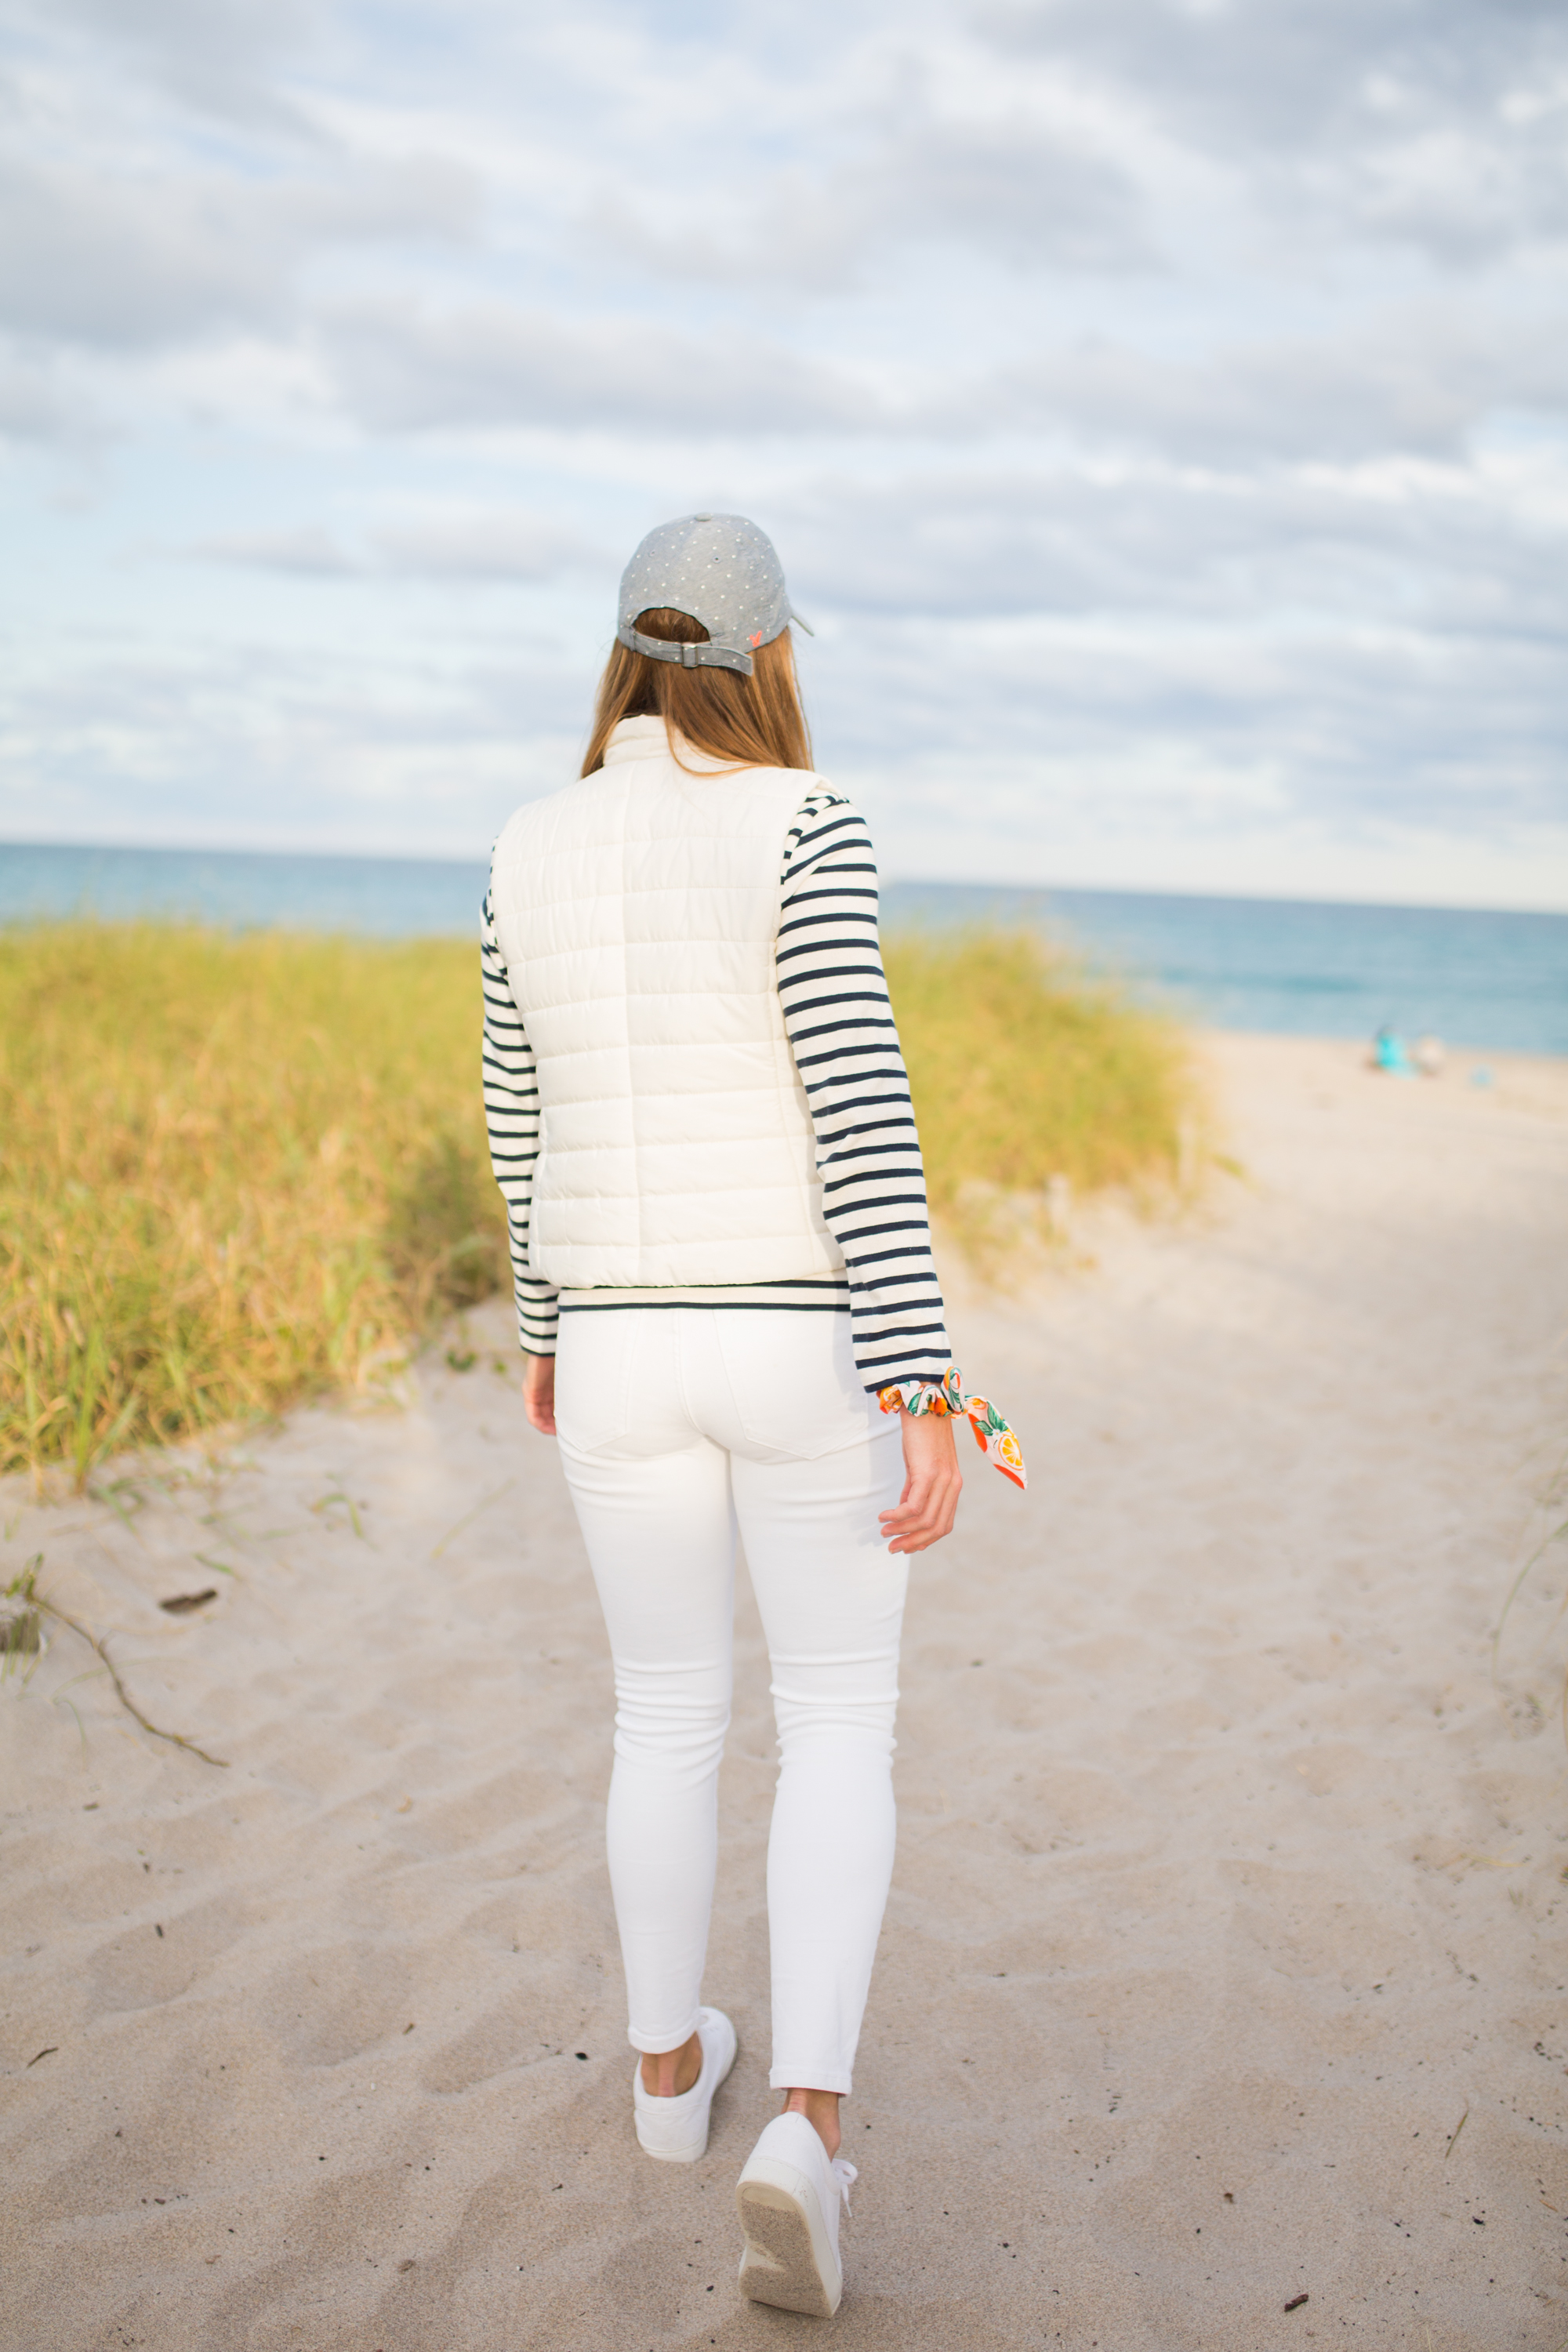 Saint James Breton Striped Shirt / American Style / Classic Style / How to Wear a Striped Top / White Jeans / Beach Style / Beach Outfit - Sunshine Style, A Florida Based Fashion Blog by Katie 